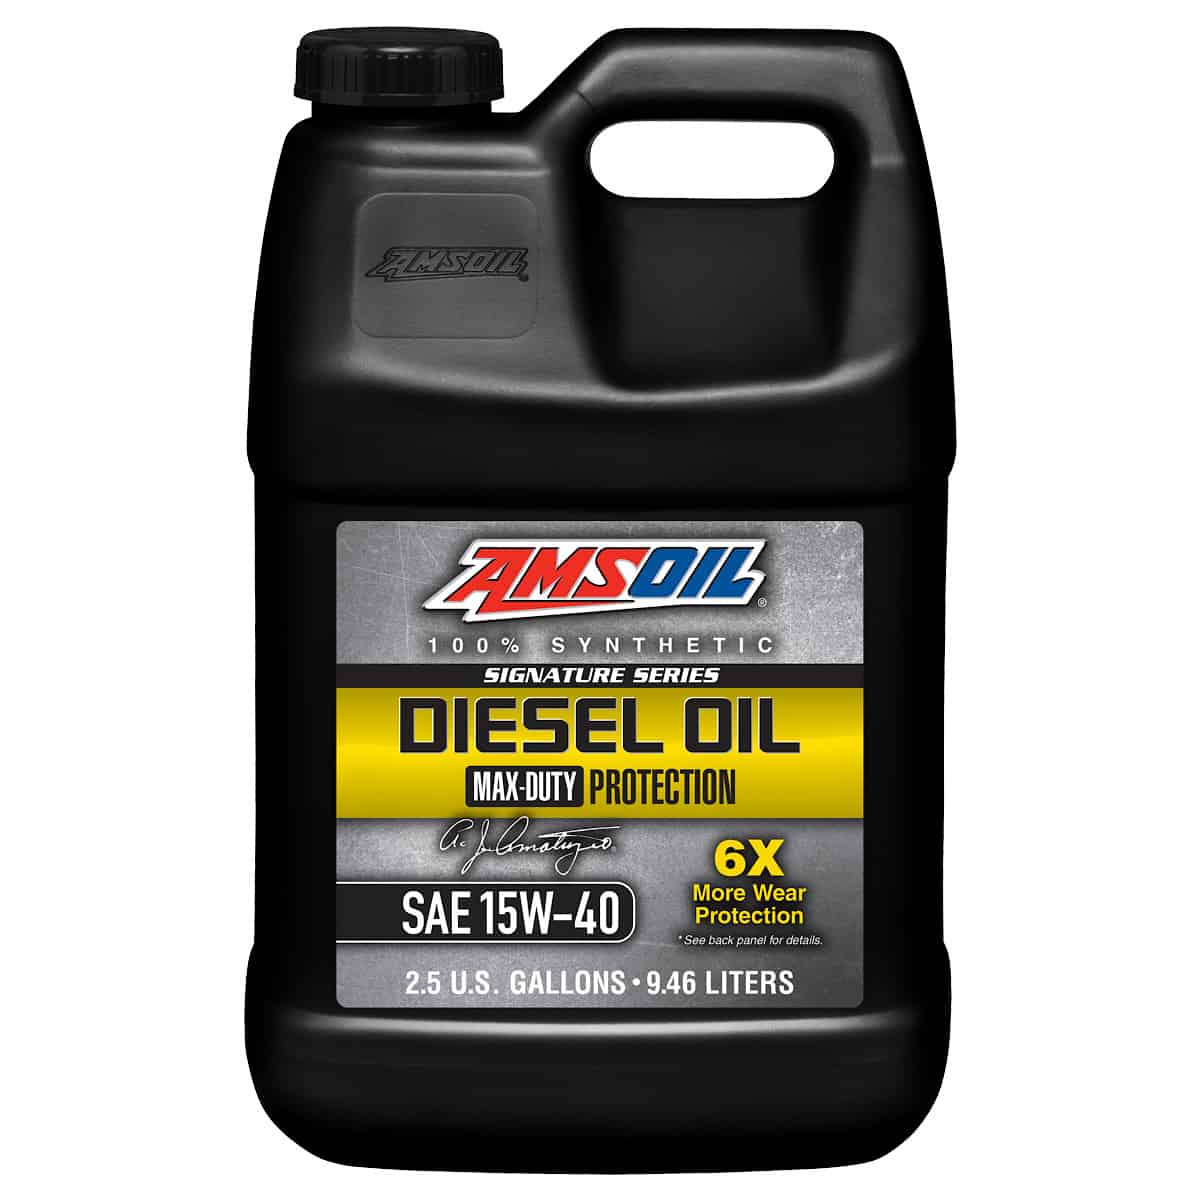 Signature Series Max Duty Synthetic Diesel Oil DMEQT